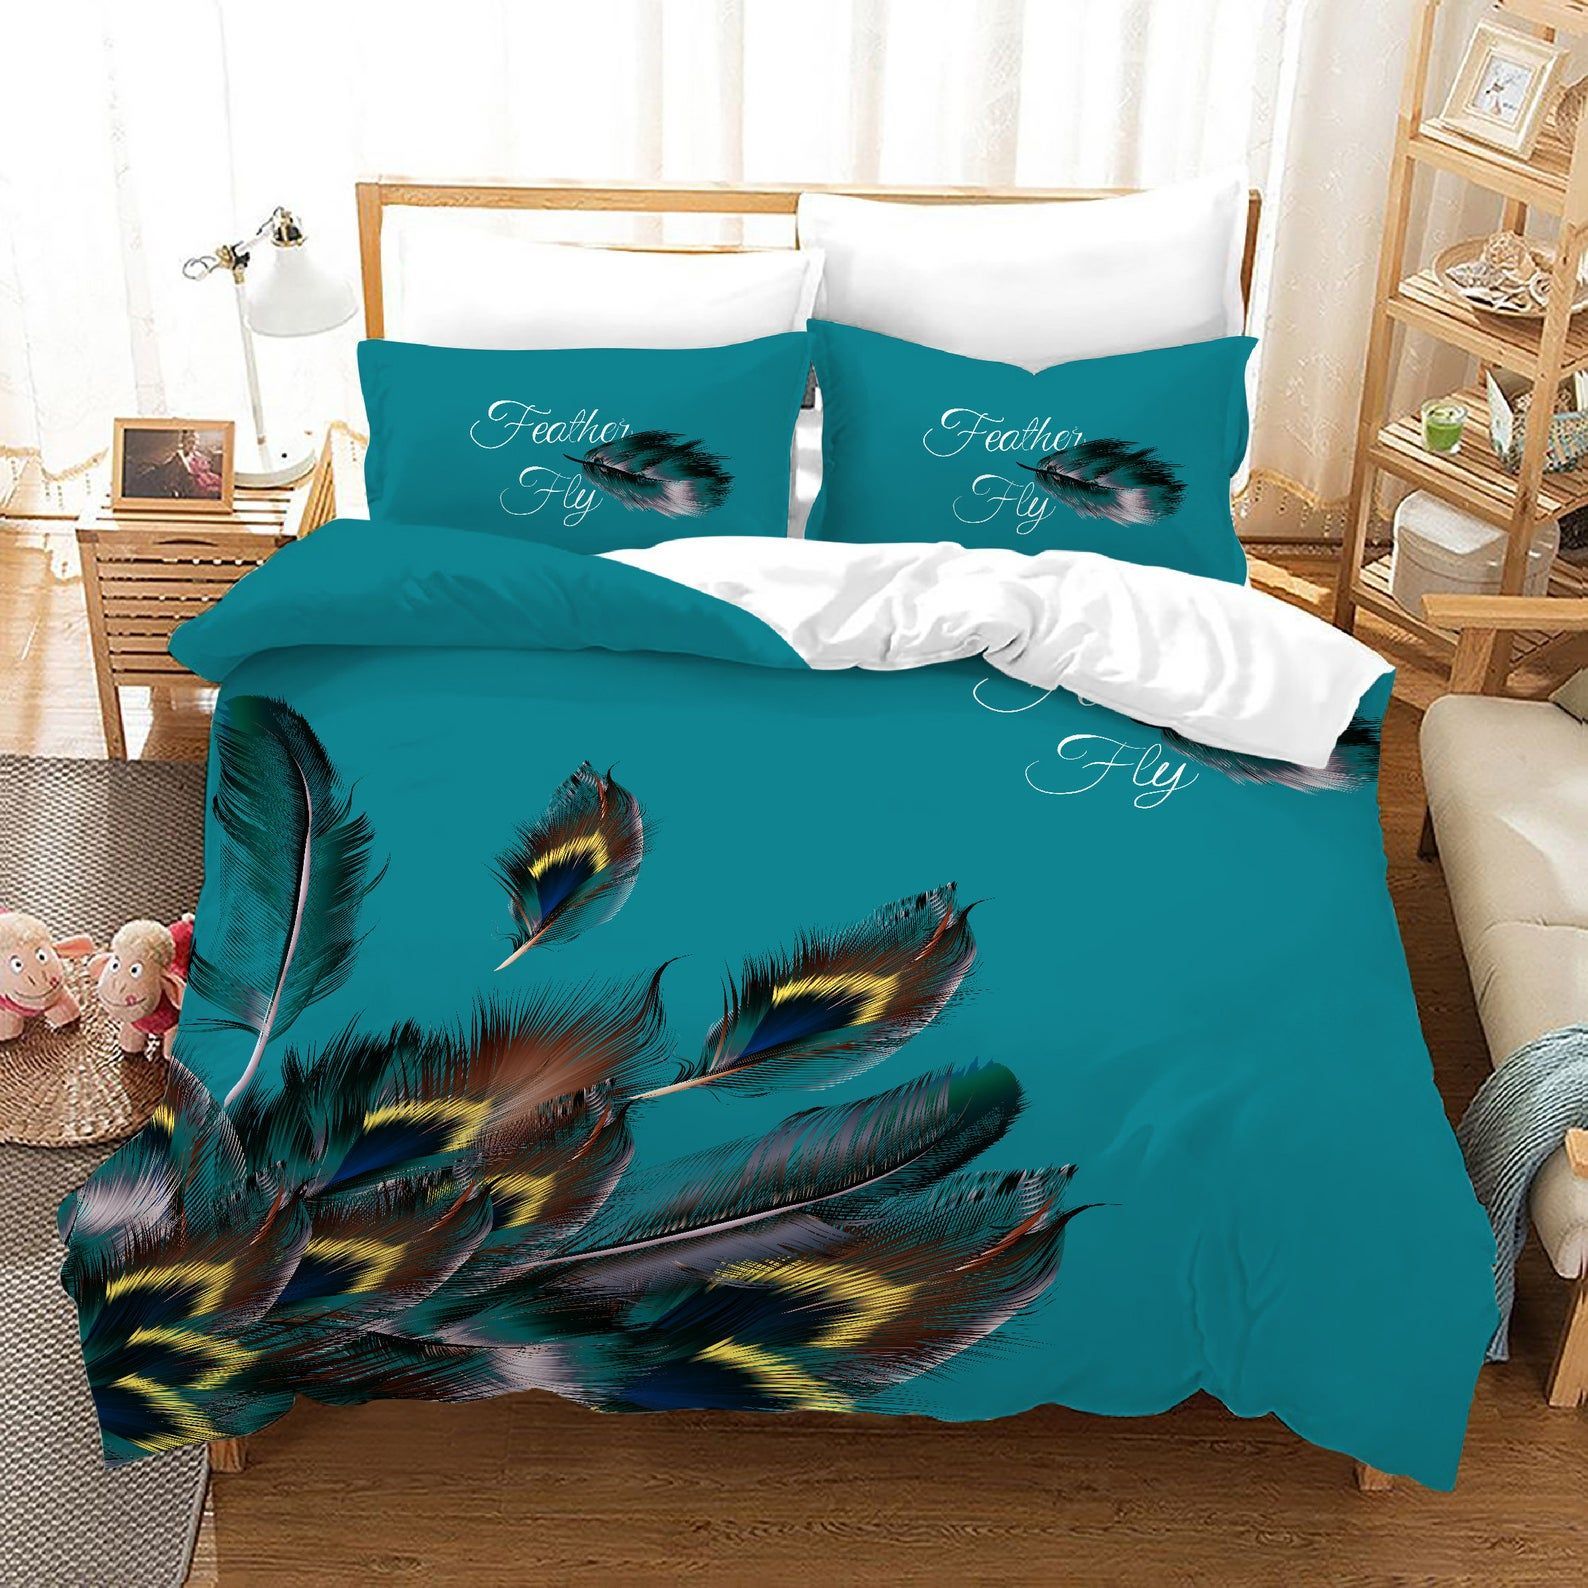 Peacock Feather Fly Bedding Set Bed Sheets Spread Comforter Duvet Cover Bedding Sets